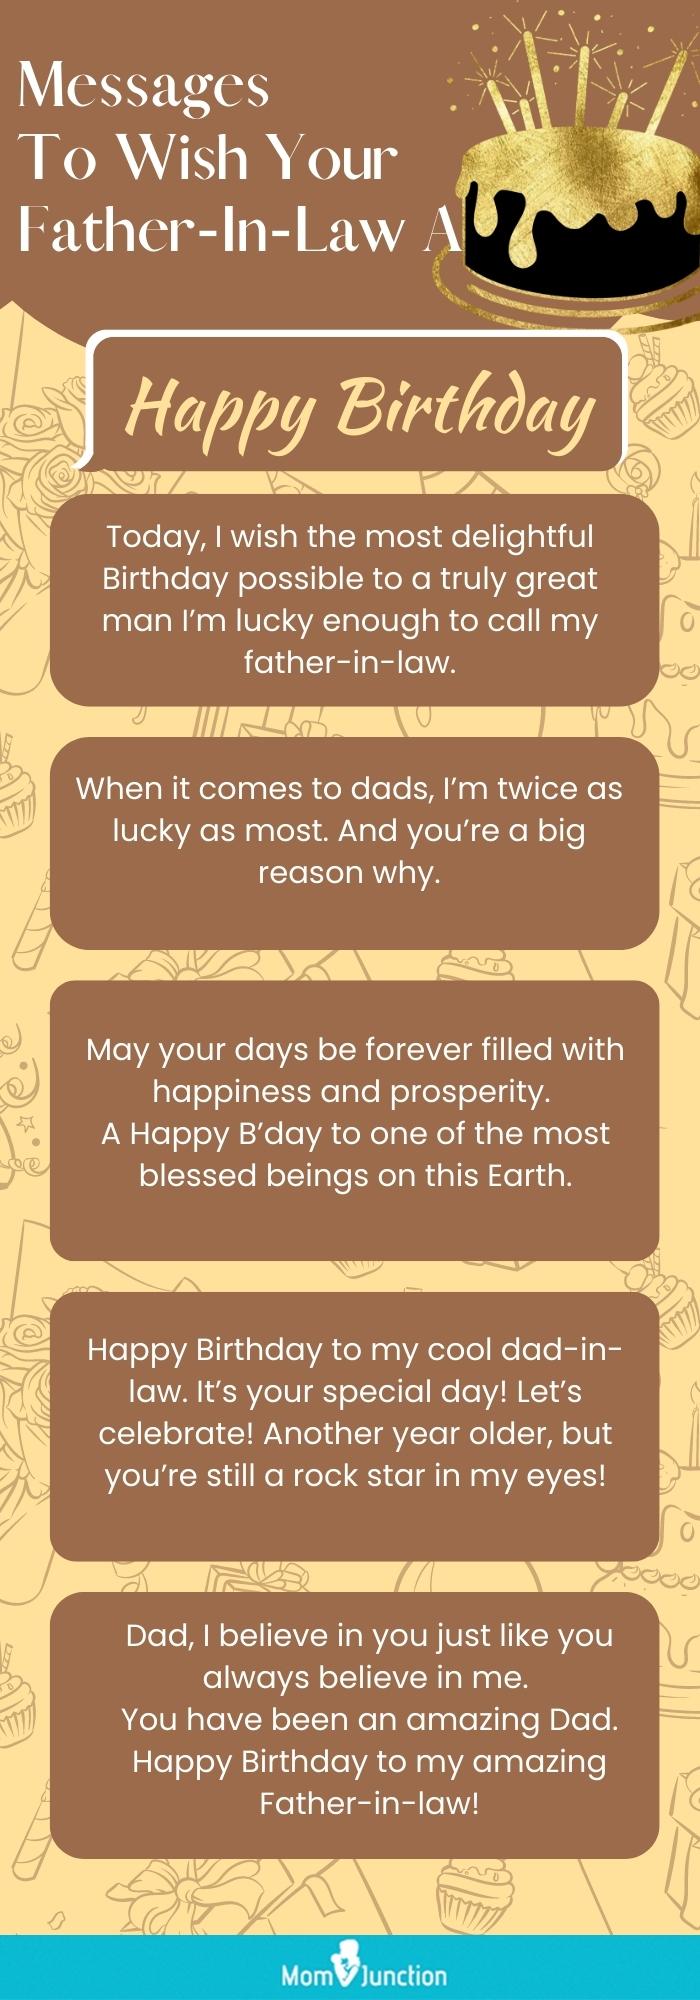 messages to wish your father in law a happy birthday (infographic)